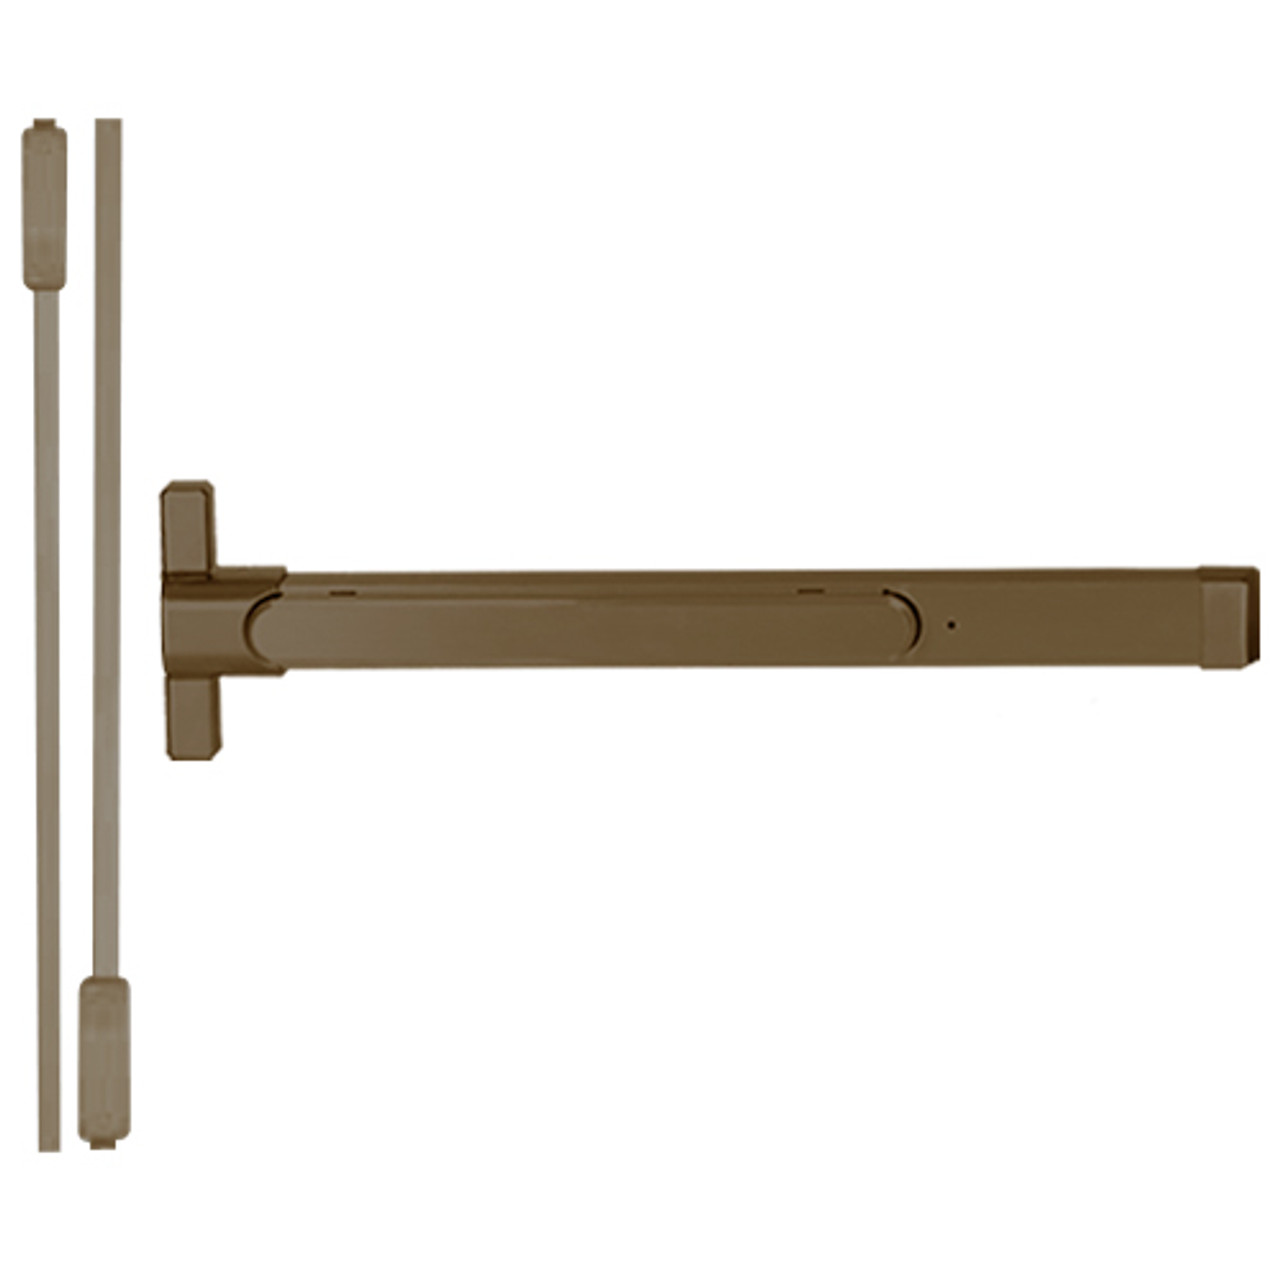 QED216-36-7-313AN Stanley QED200 Series Heavy Duty Narrow Stile Surface Vertical Rod Fire Rated Exit Device in Anodized Duranodic Bronze Finish